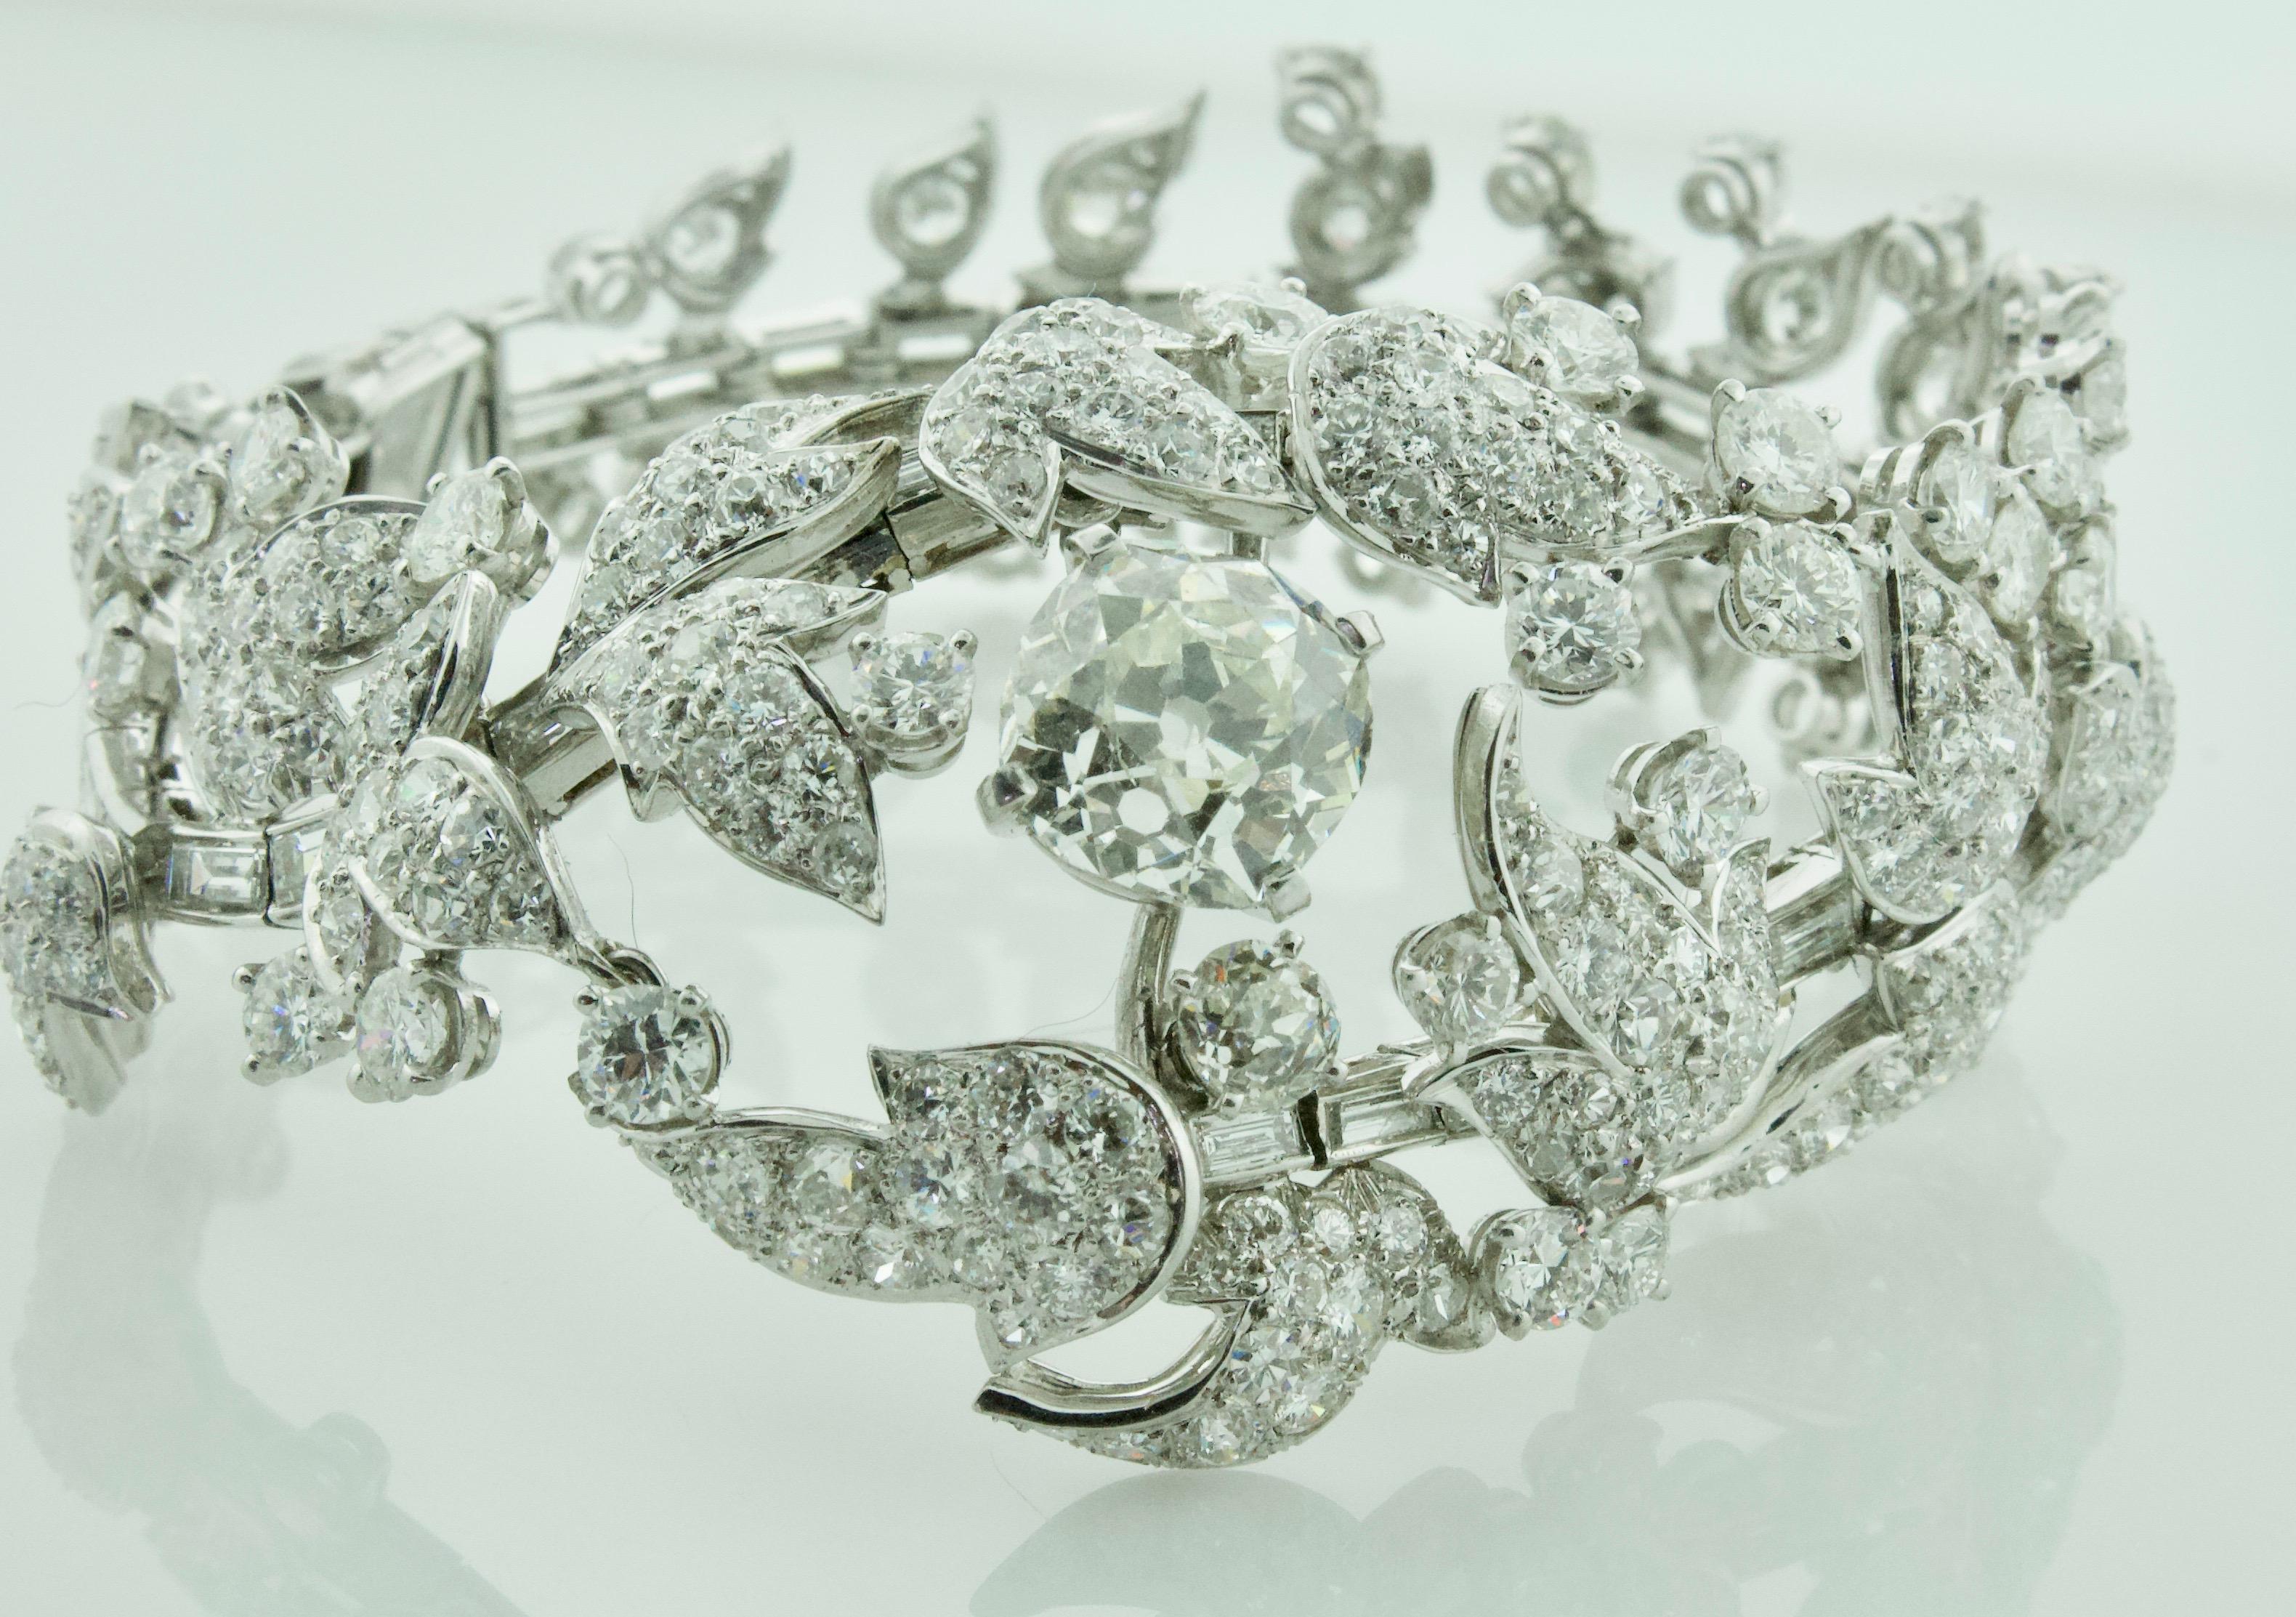 Introducing the epitome of elegance and luxury – our exquisite Magnificent Estate Diamond Bracelet. Meticulously crafted to captivate the senses, this bracelet is a true testament to timeless beauty and impeccable craftsmanship.

At the heart of